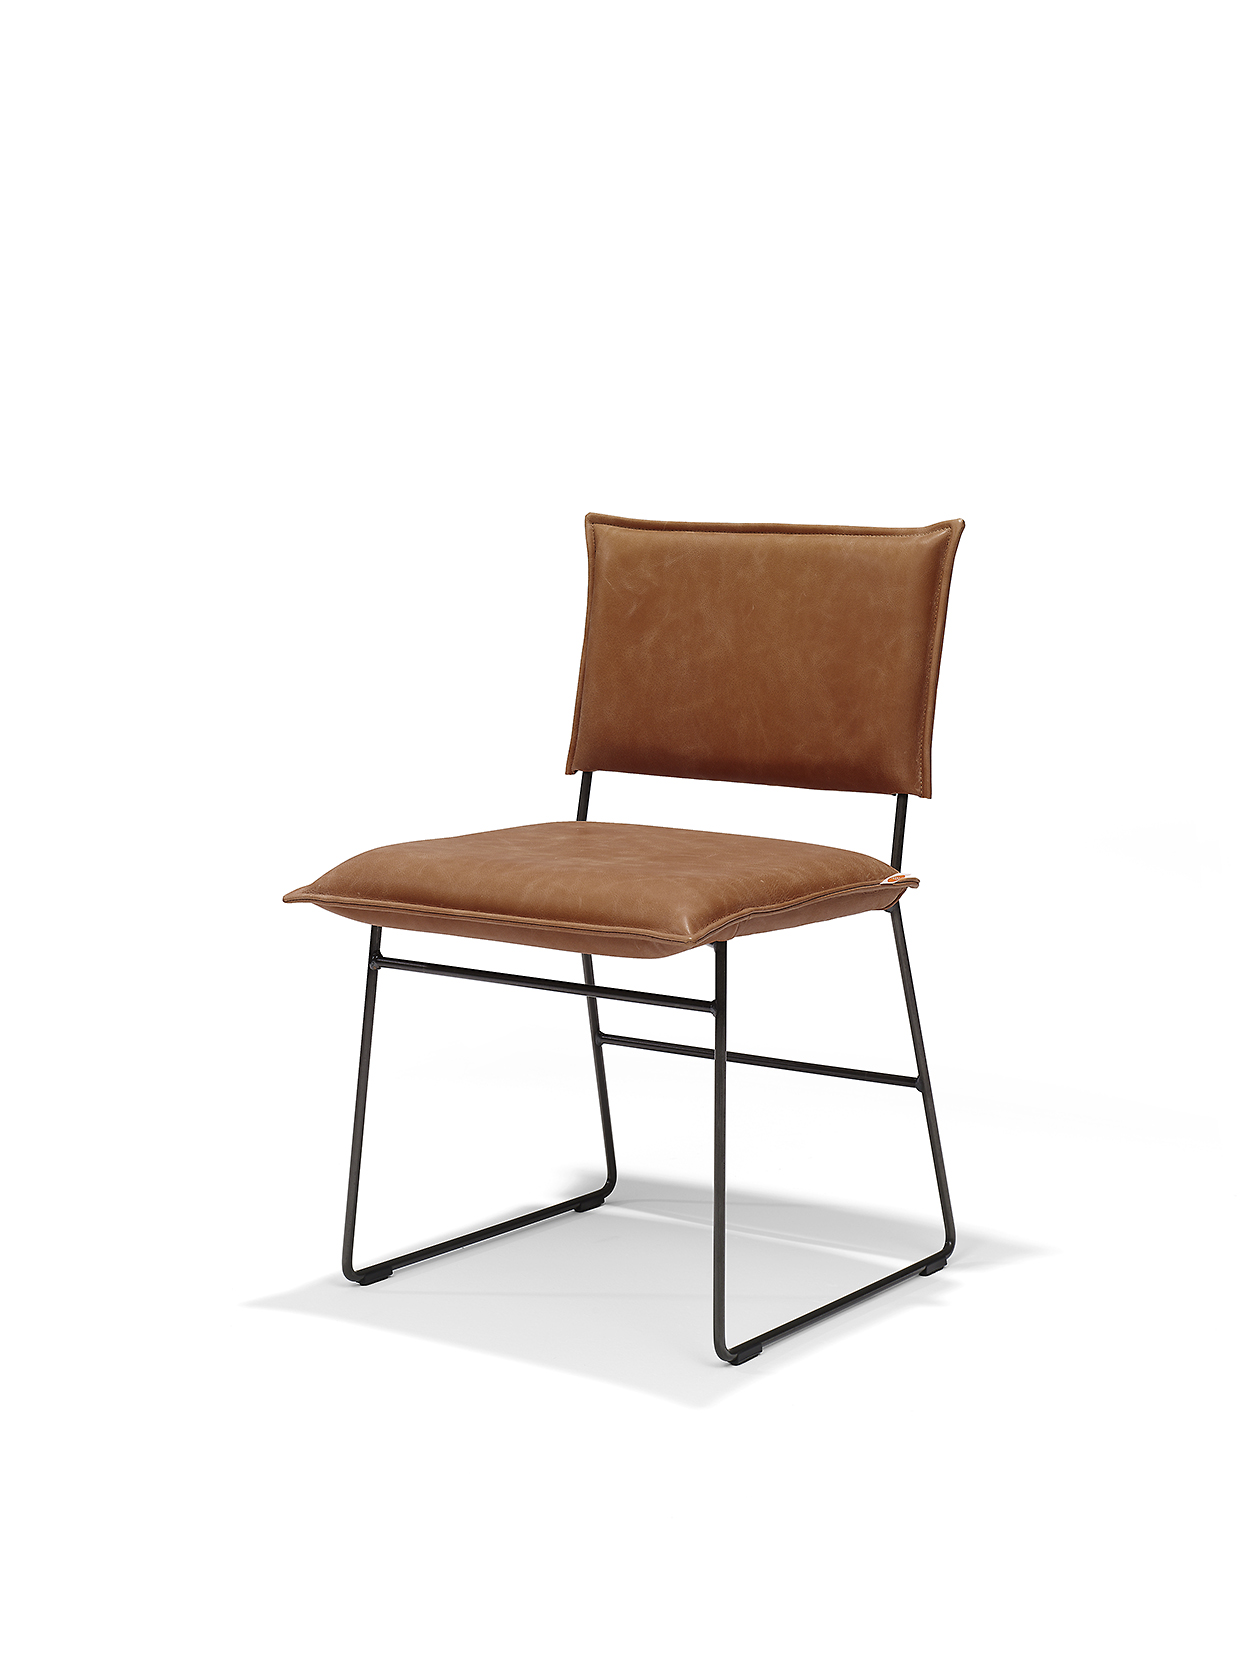 Norman Chair Without Arm Bonanza Tan Pers LR